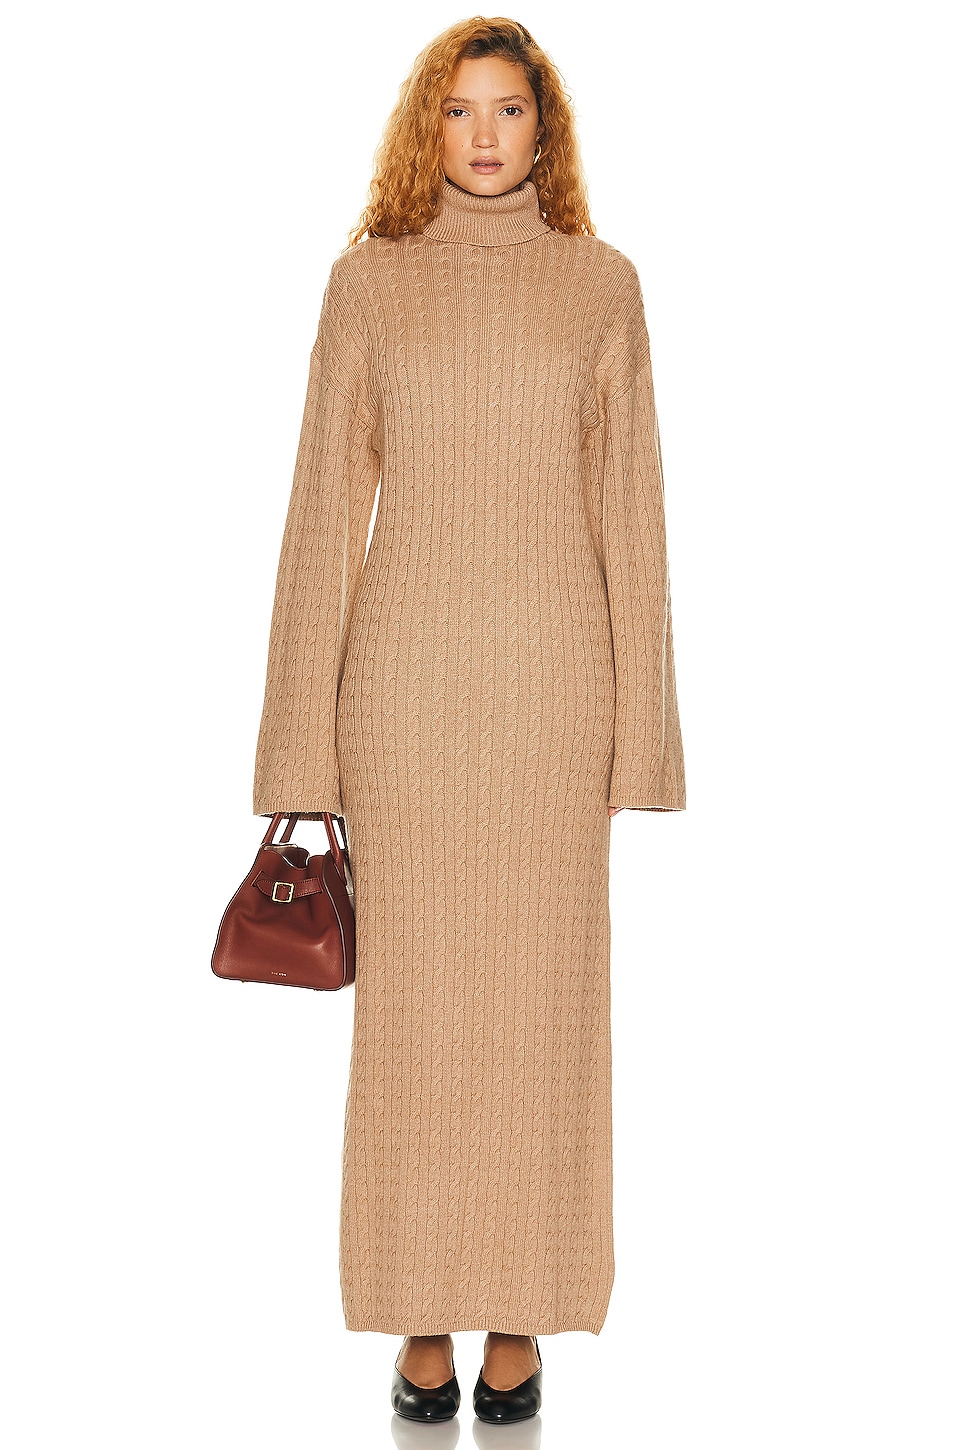 Image 1 of Helsa Shai Cable Knit Dress in Cinnamon